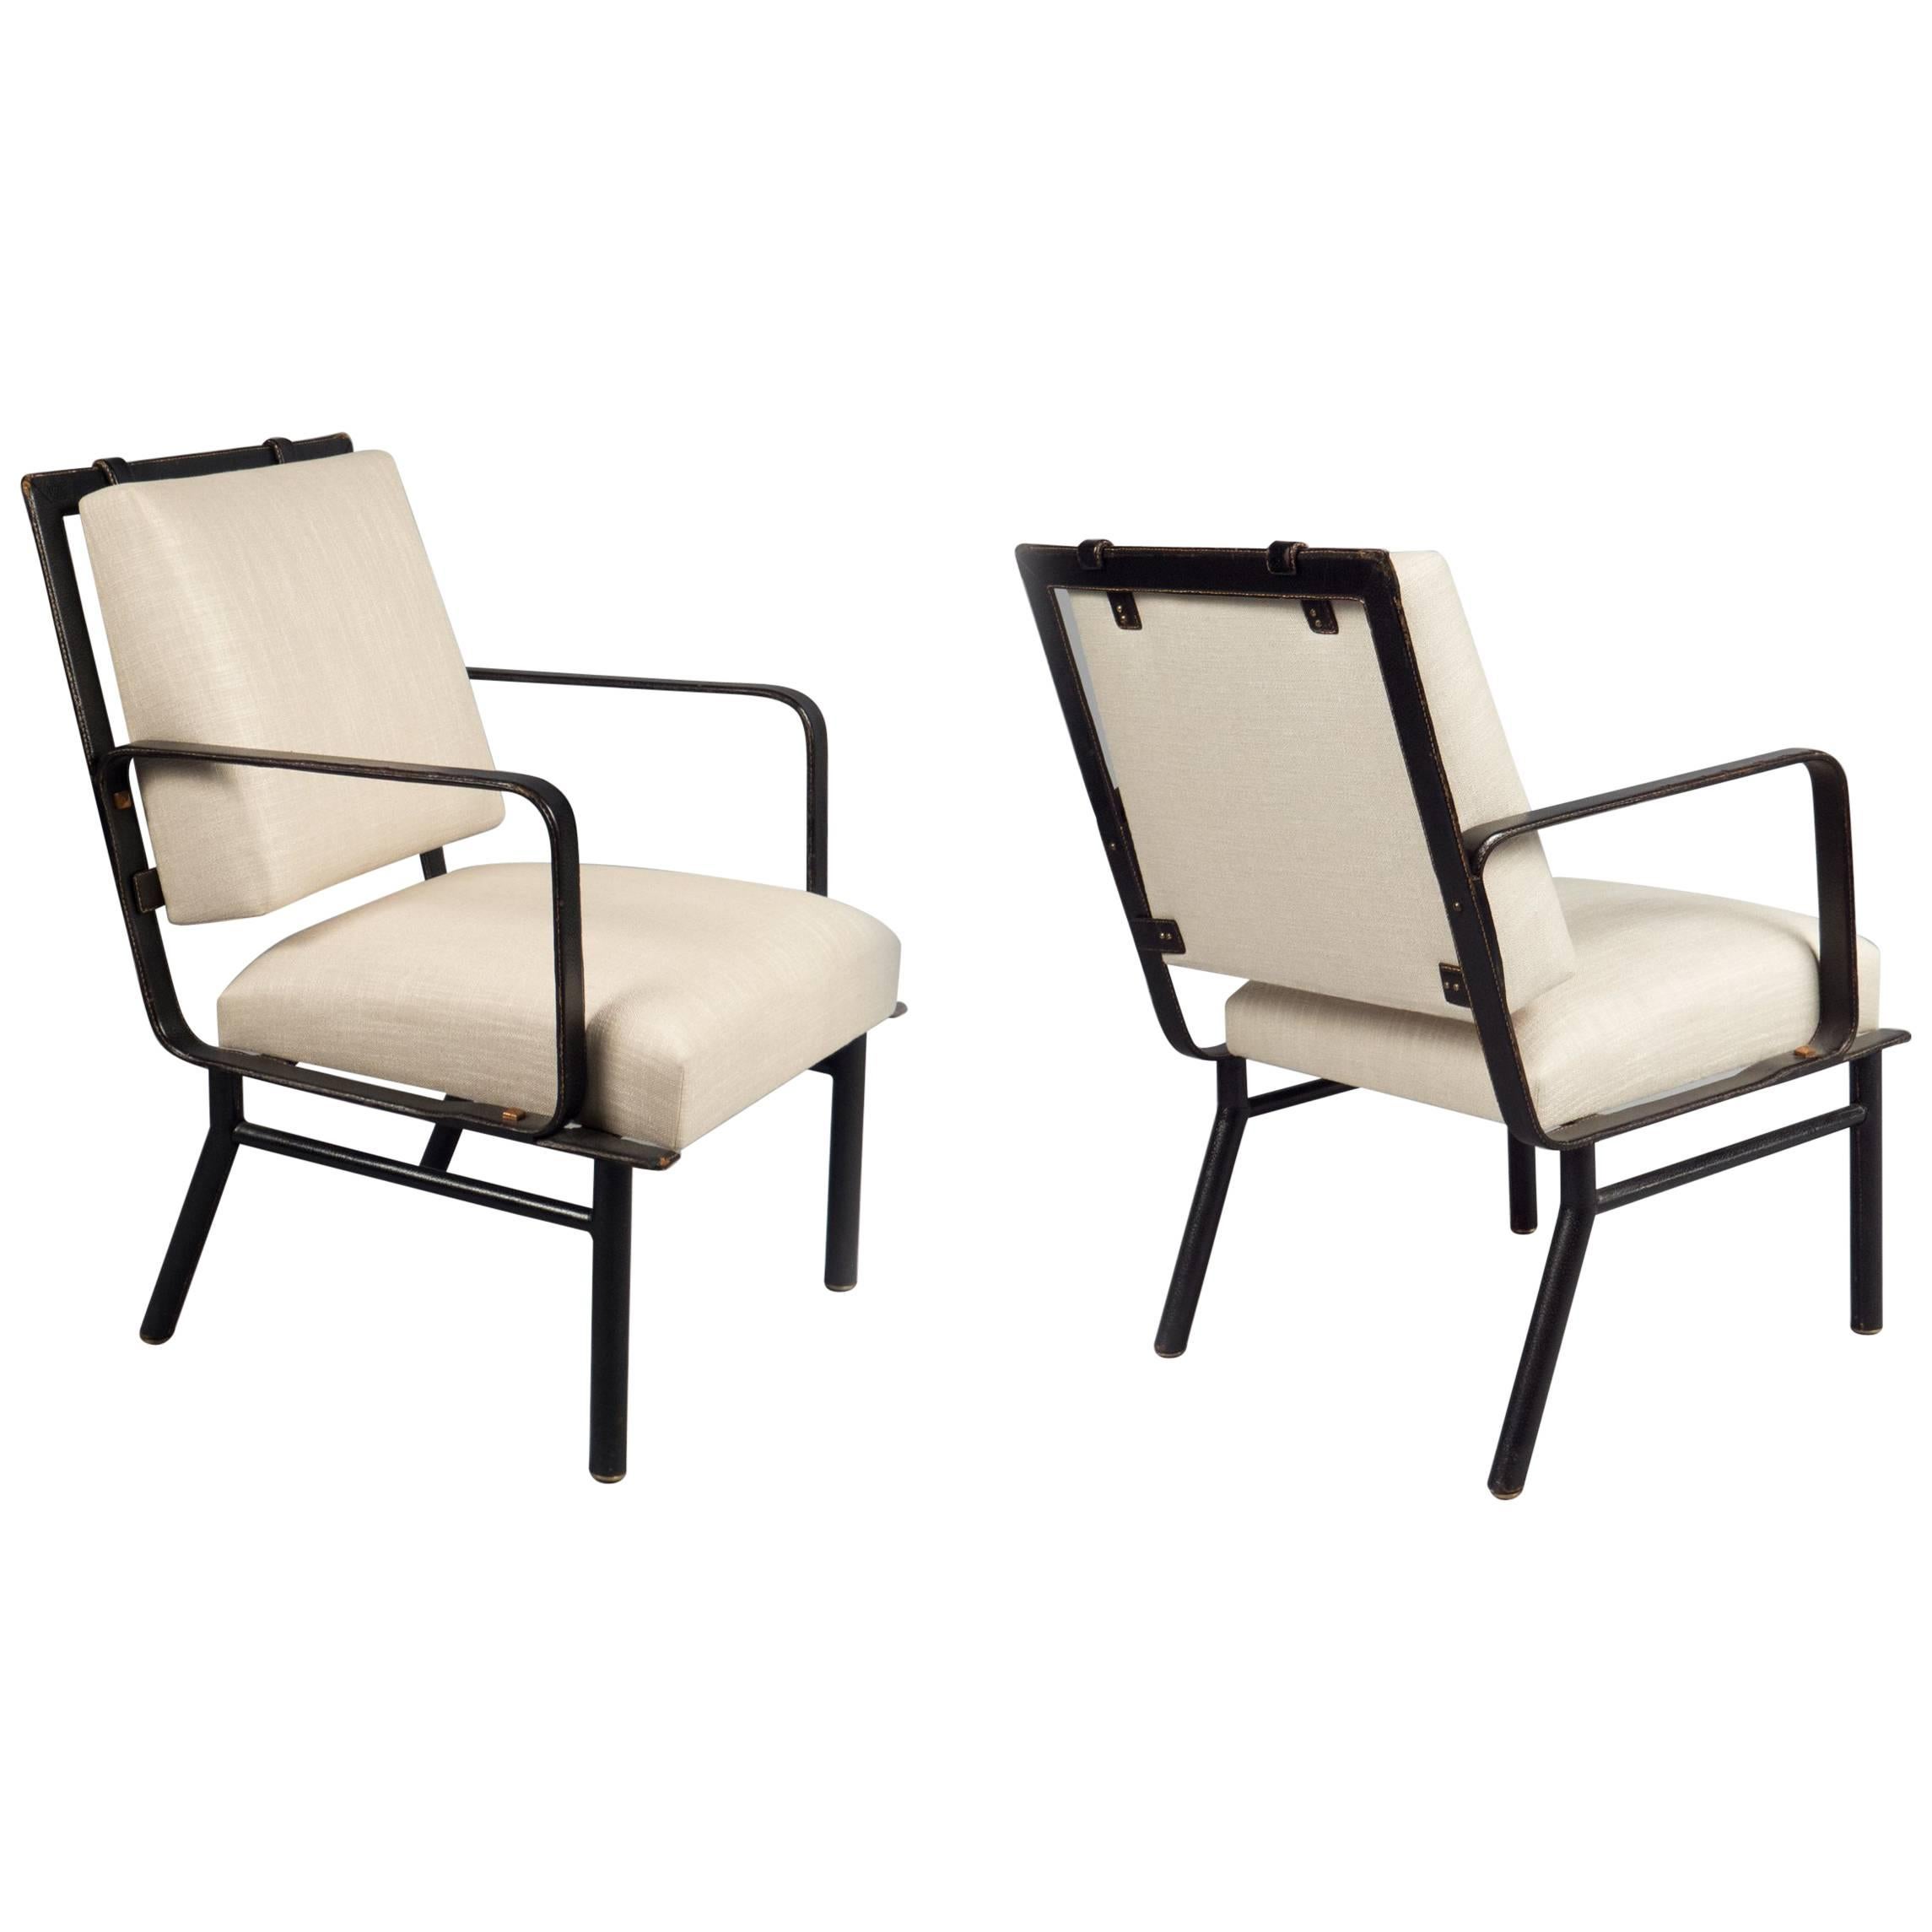 Pair of Armchairs Attributed to Jacques Adnet, France, circa 1950